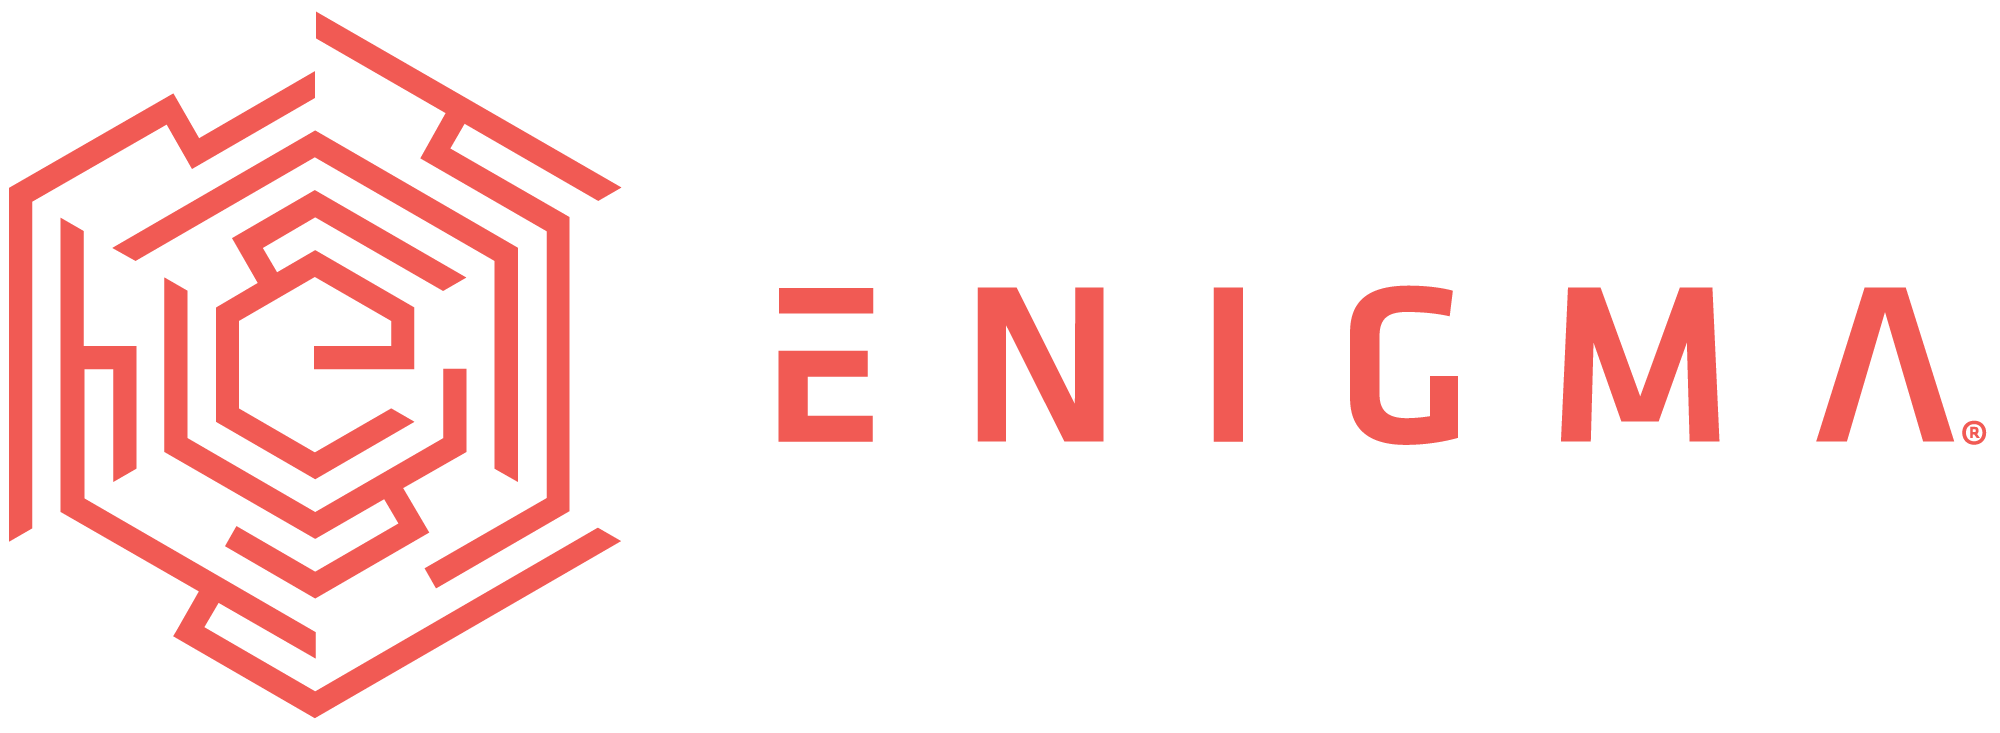 enigma-logo_red_tm_2000x733.png